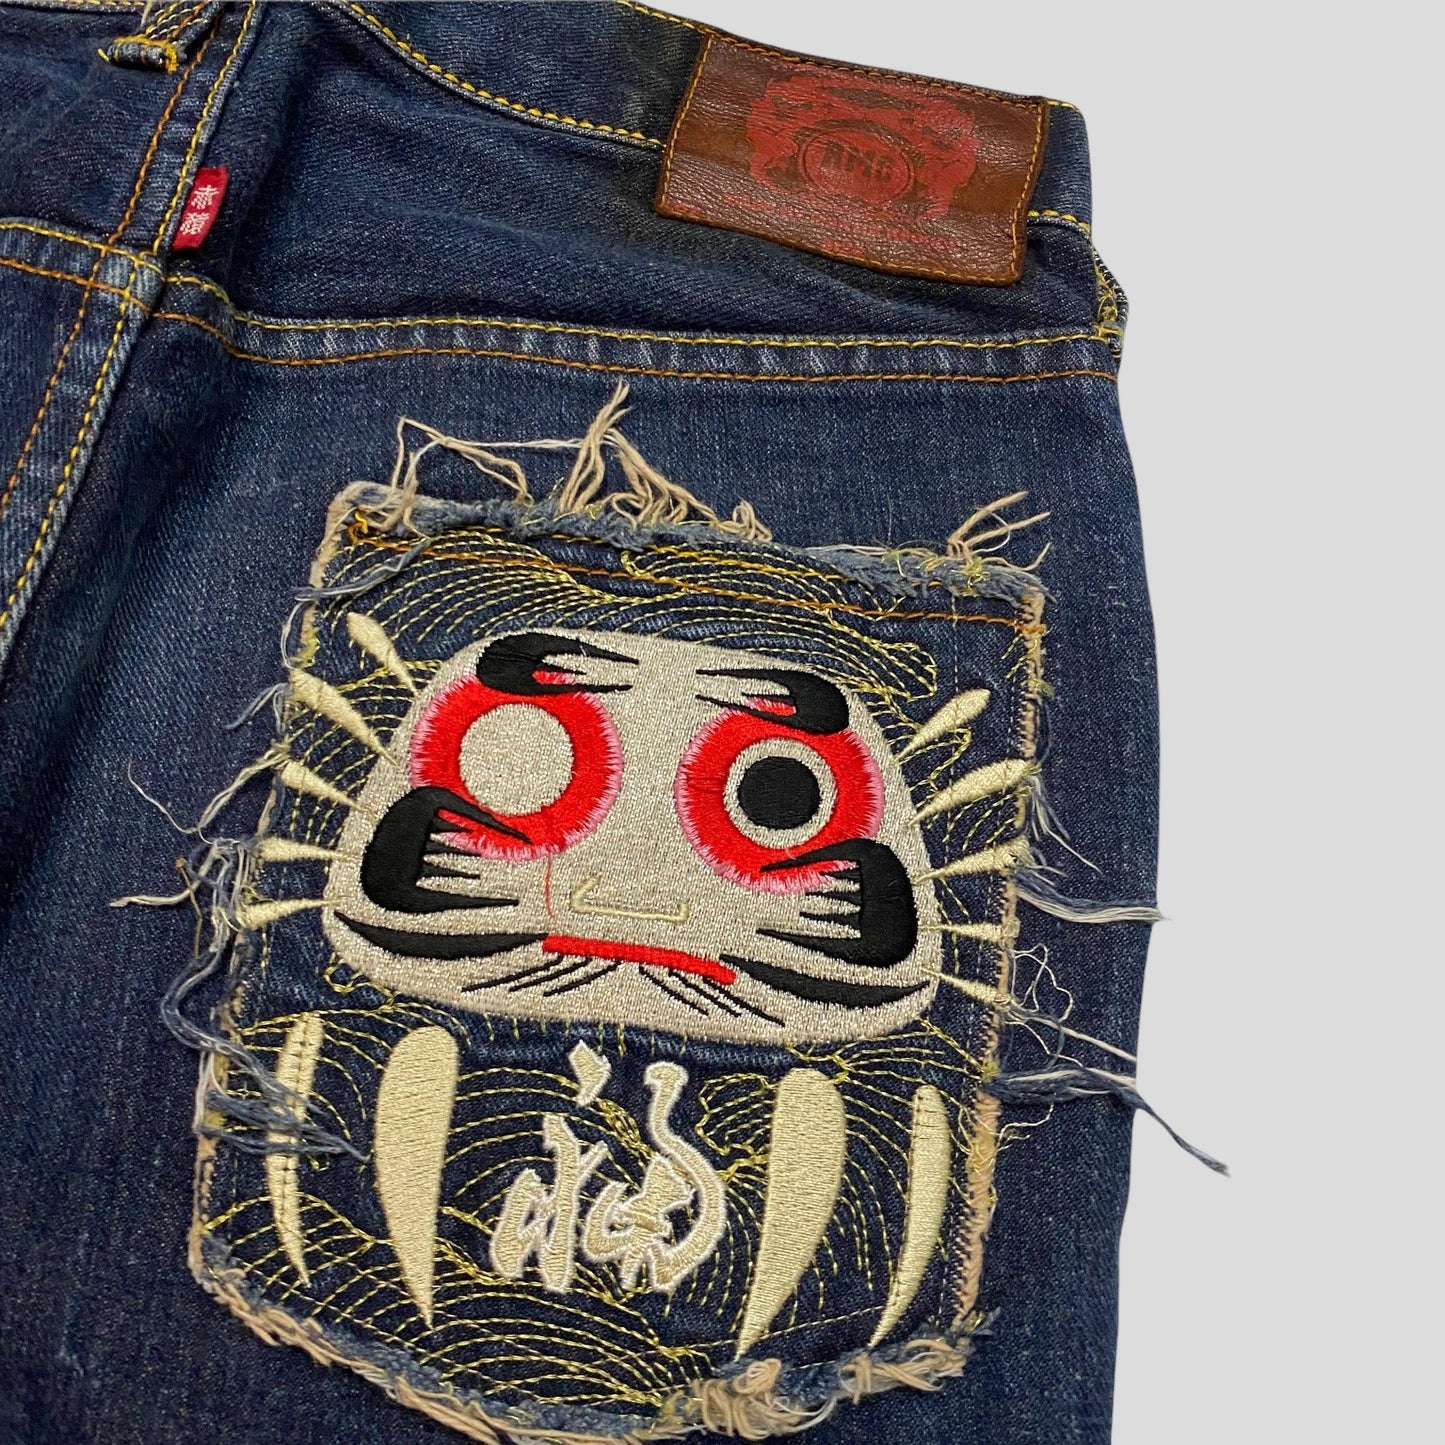 RMC 00’s Embroidered Denim Jeans - w28 - Known Source